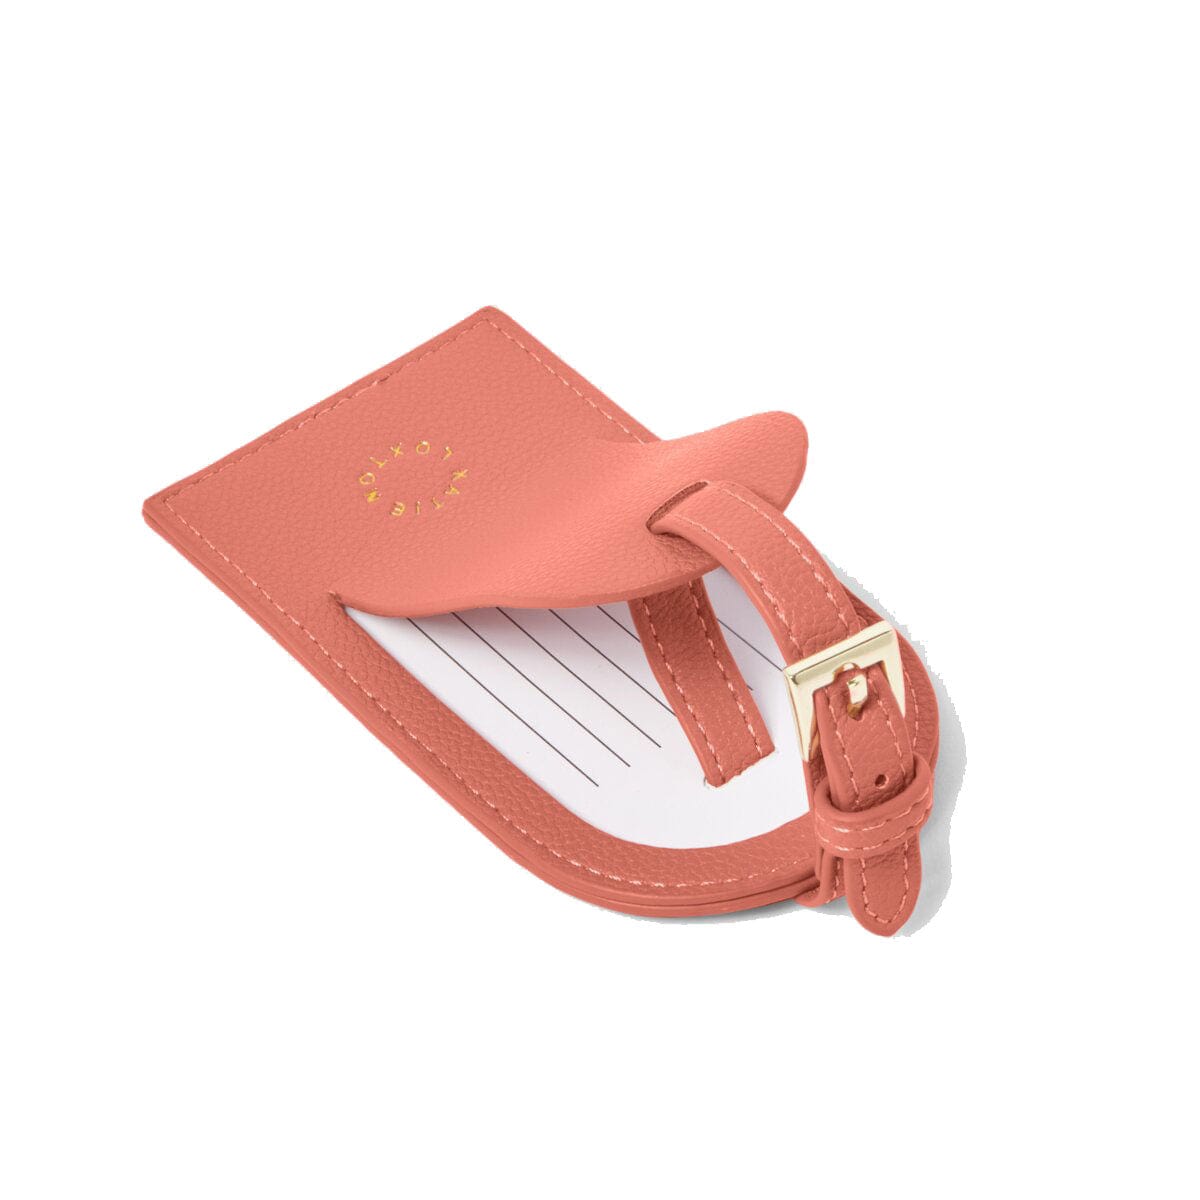 Katie Loxton Travel Accessories Katie Loxton Luggage Tag - Yay for Vacay - Coral